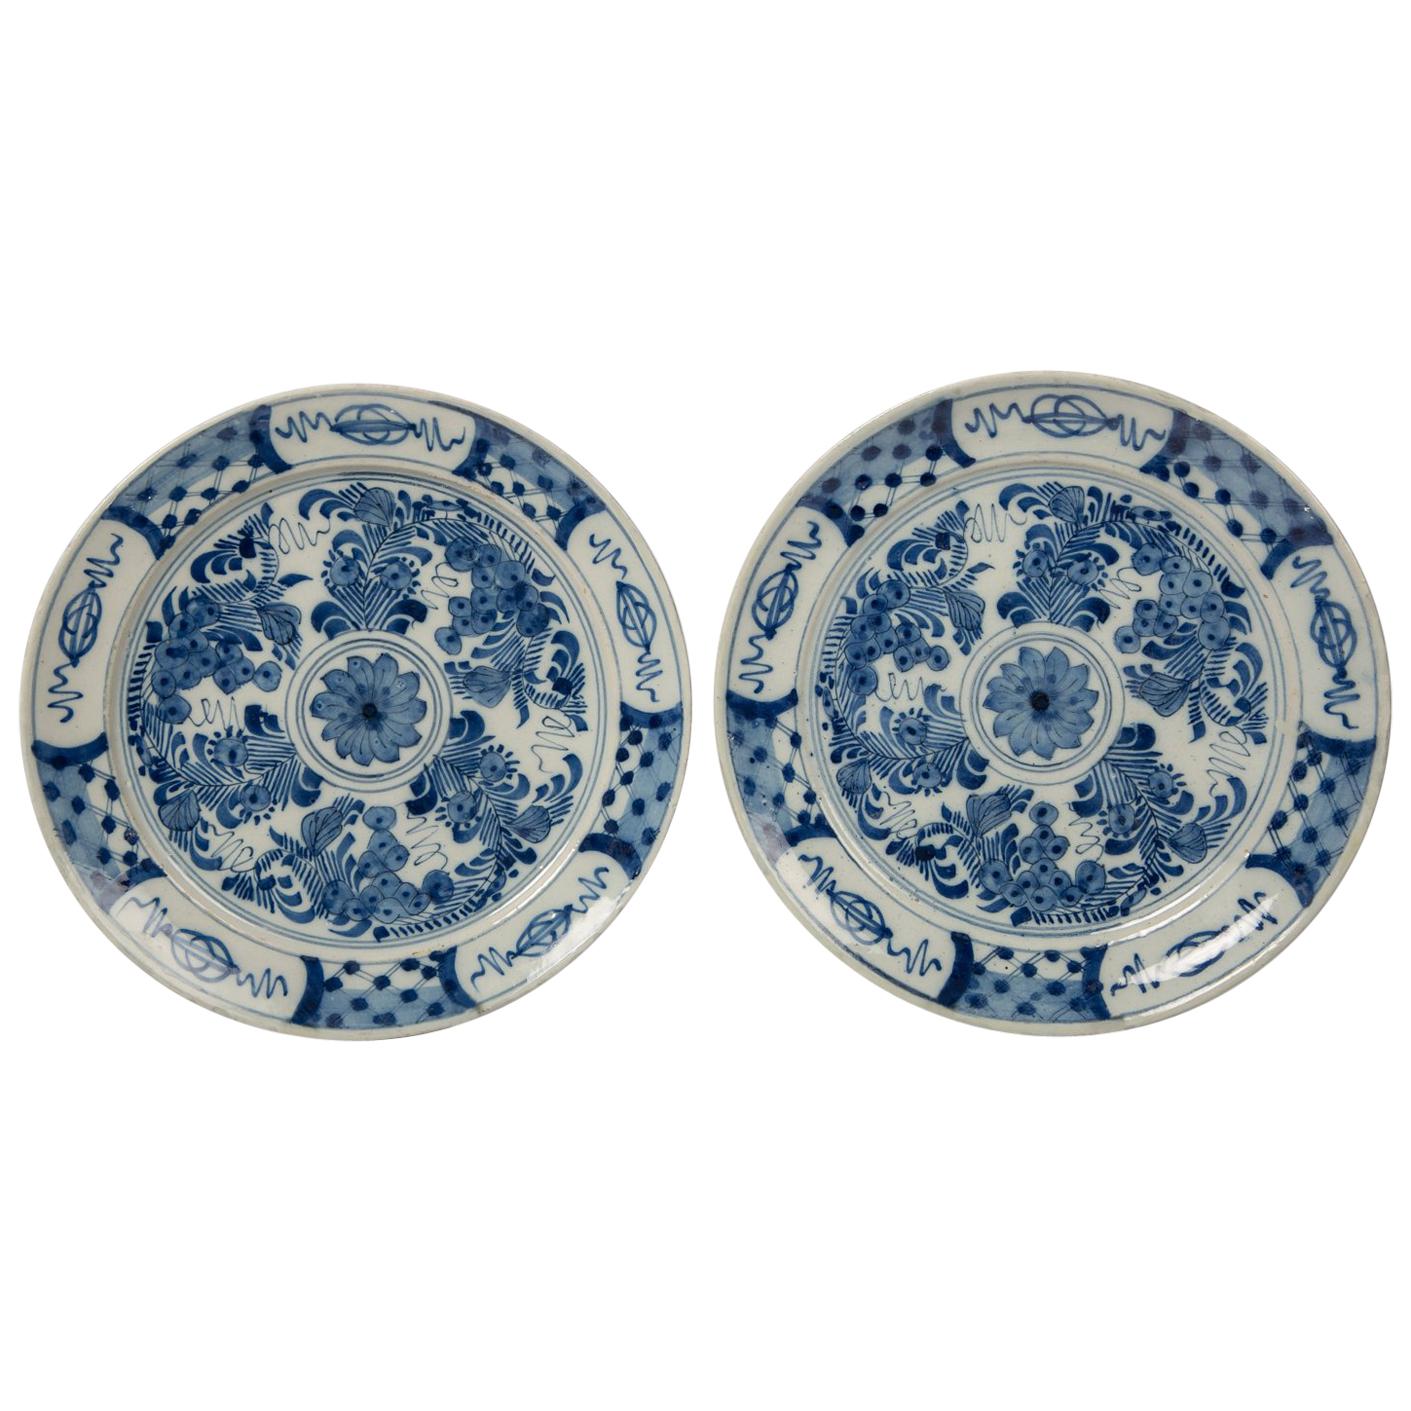 Pair of Antique Blue and White Delft Plates circa 1780